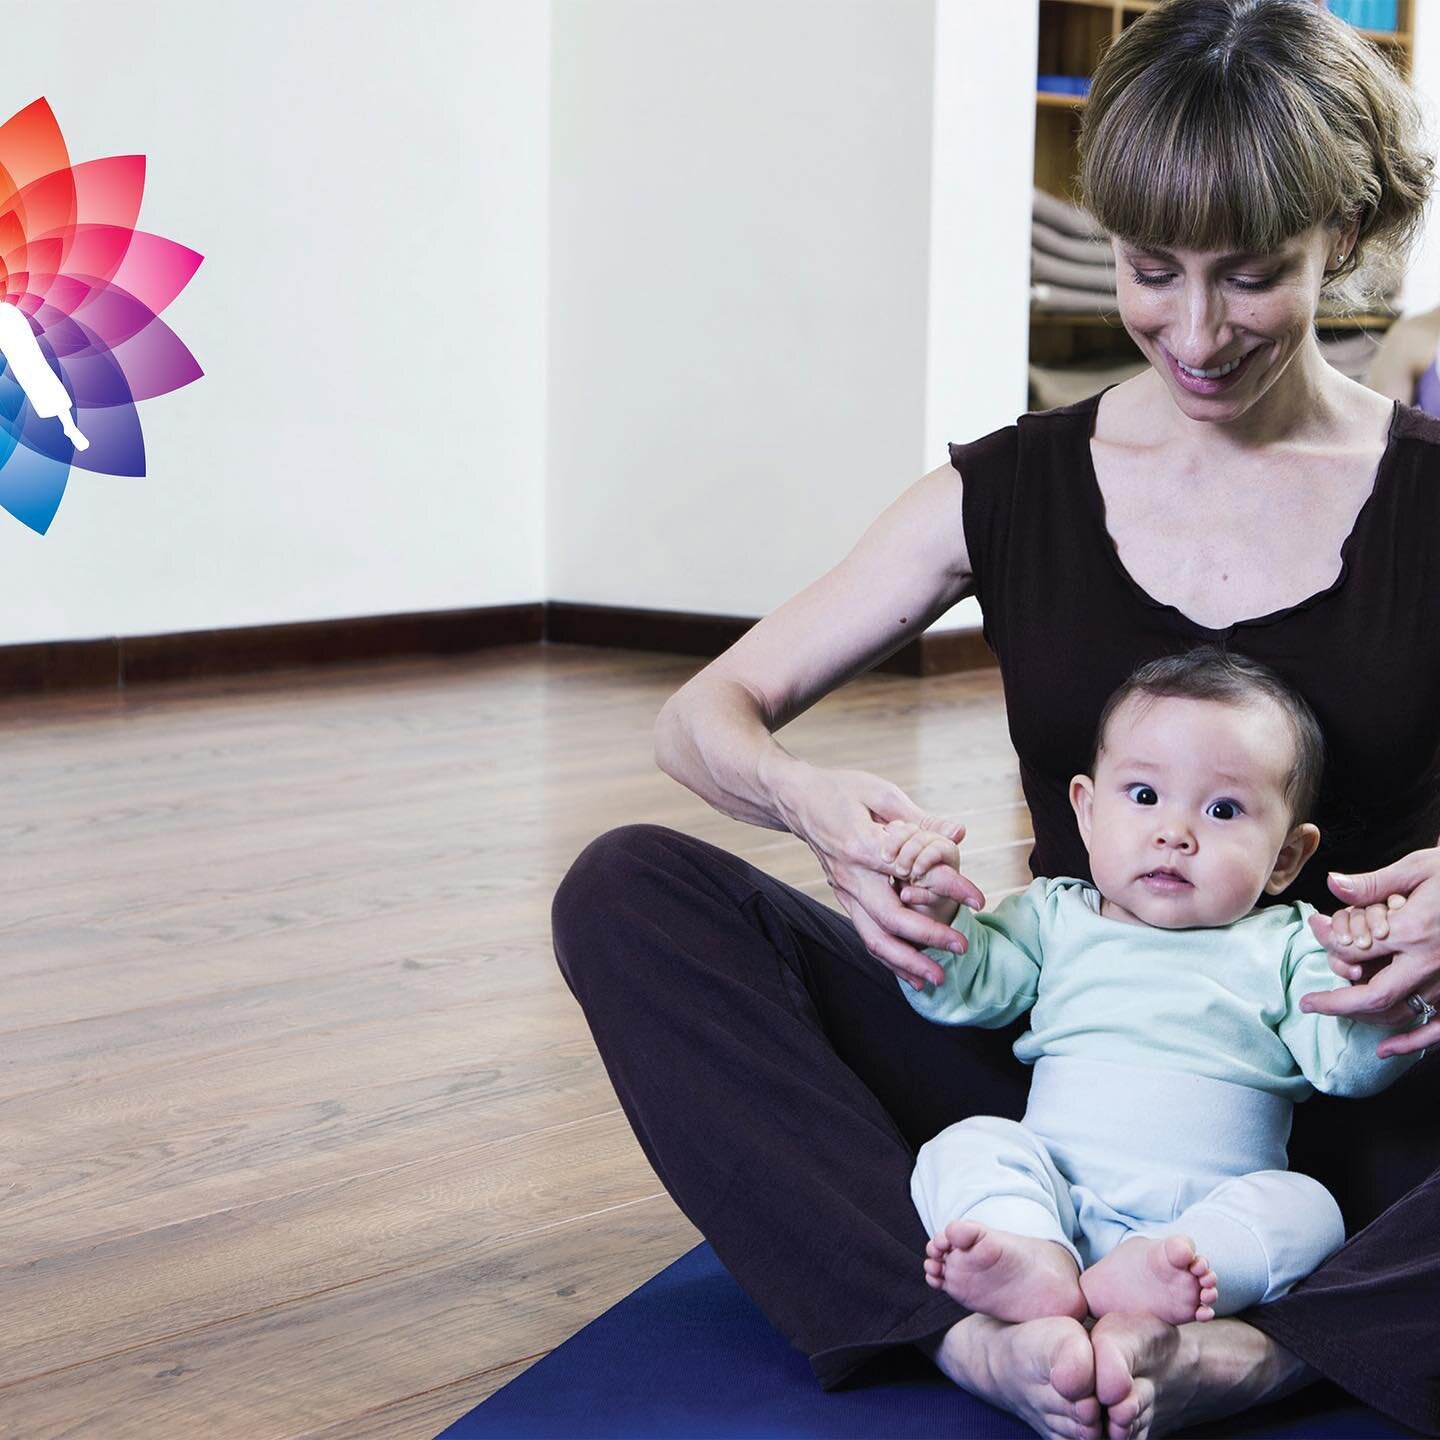 We&rsquo;ve just three spaces left in our weekly Wednesday Mom &amp; Baby class tomorrow afternoon. 
We provide a safe environment where you and your new person can relax with other Moms and their new little people 🥳 
Babies get a chance to see othe